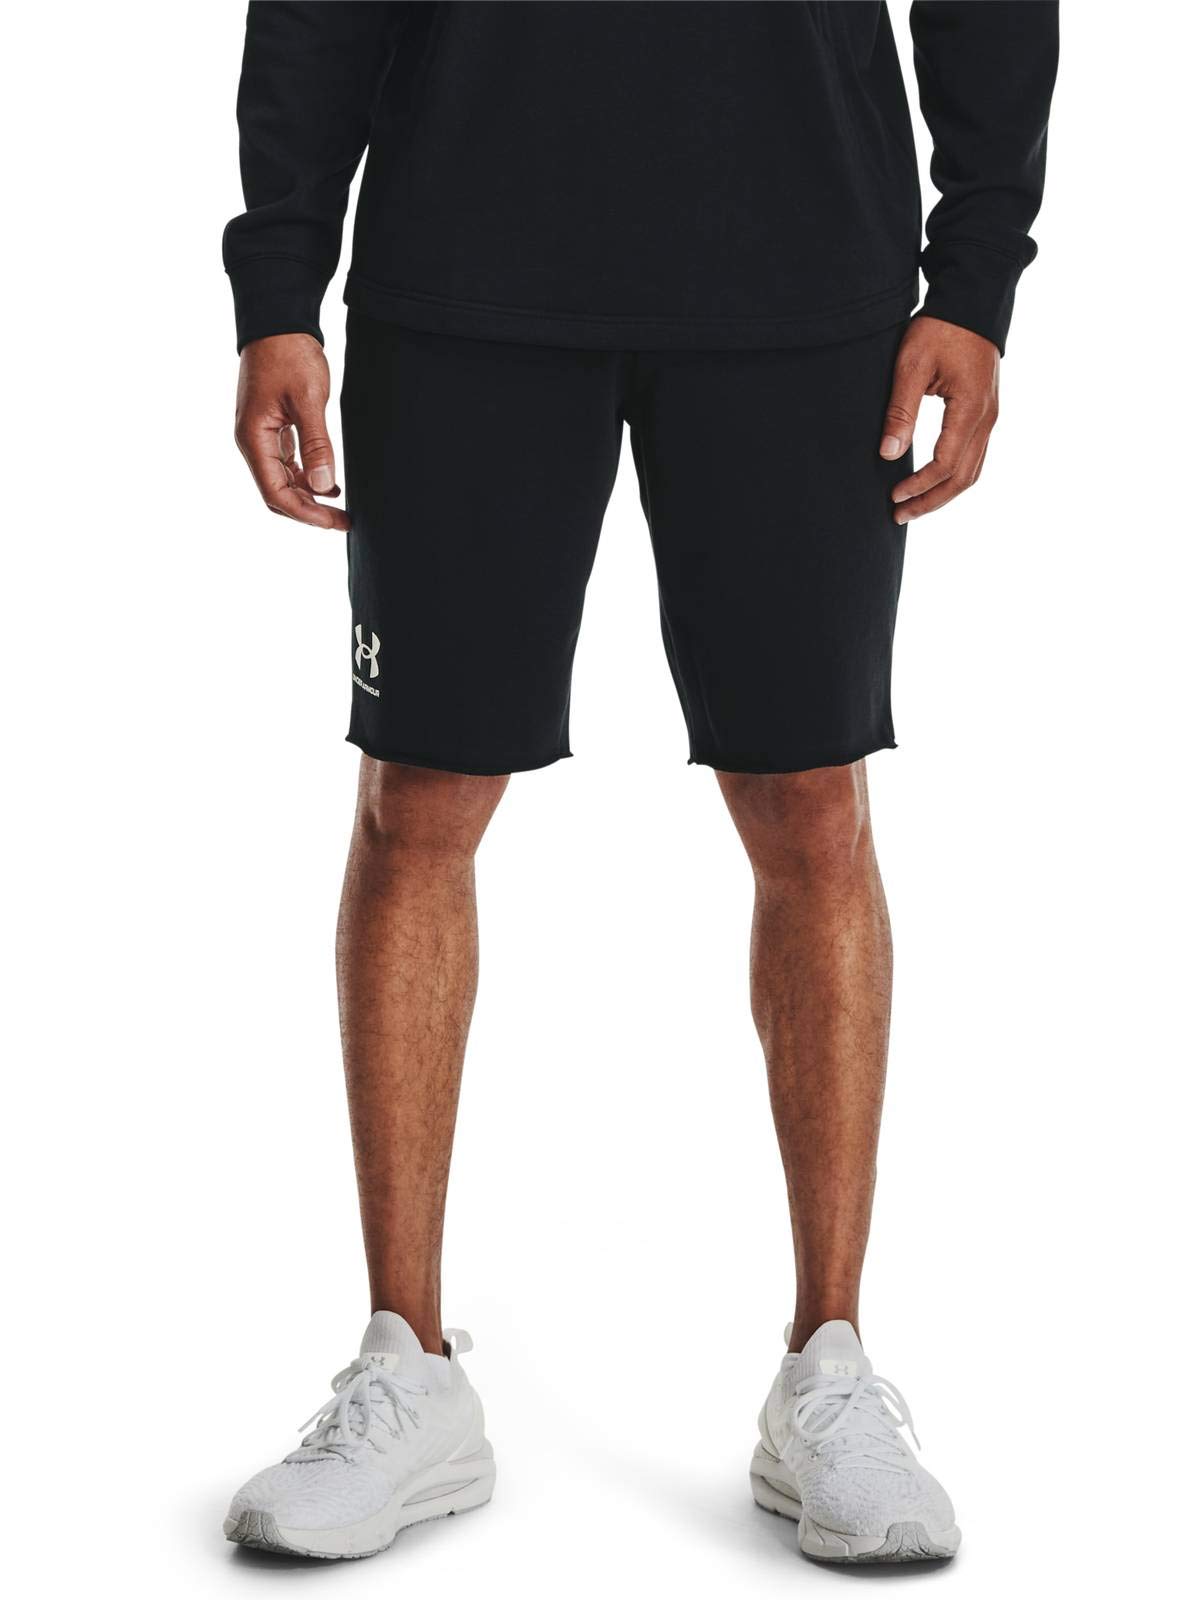 Under Armour Mens Rival Terry Shorts (Color: Black (001)/Onyx White; Size: XS-4XL) $15.71 +FS w/Prime